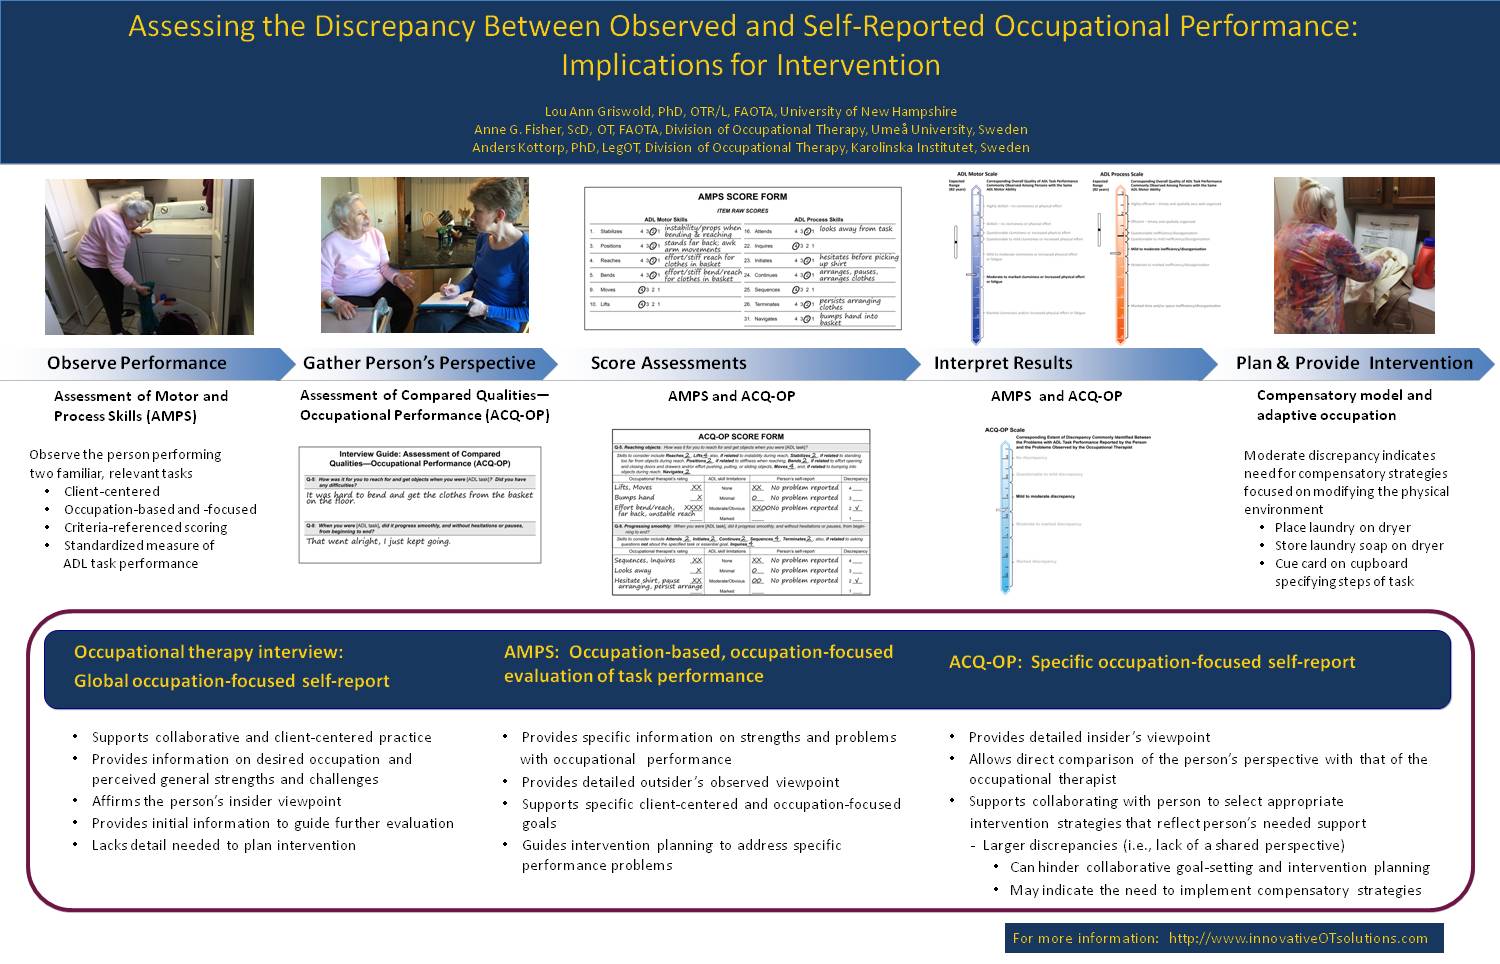 Assessing The Discrepancy Between Observed And Self-Reported Occupational Performance:   Implications For Intervention by loug